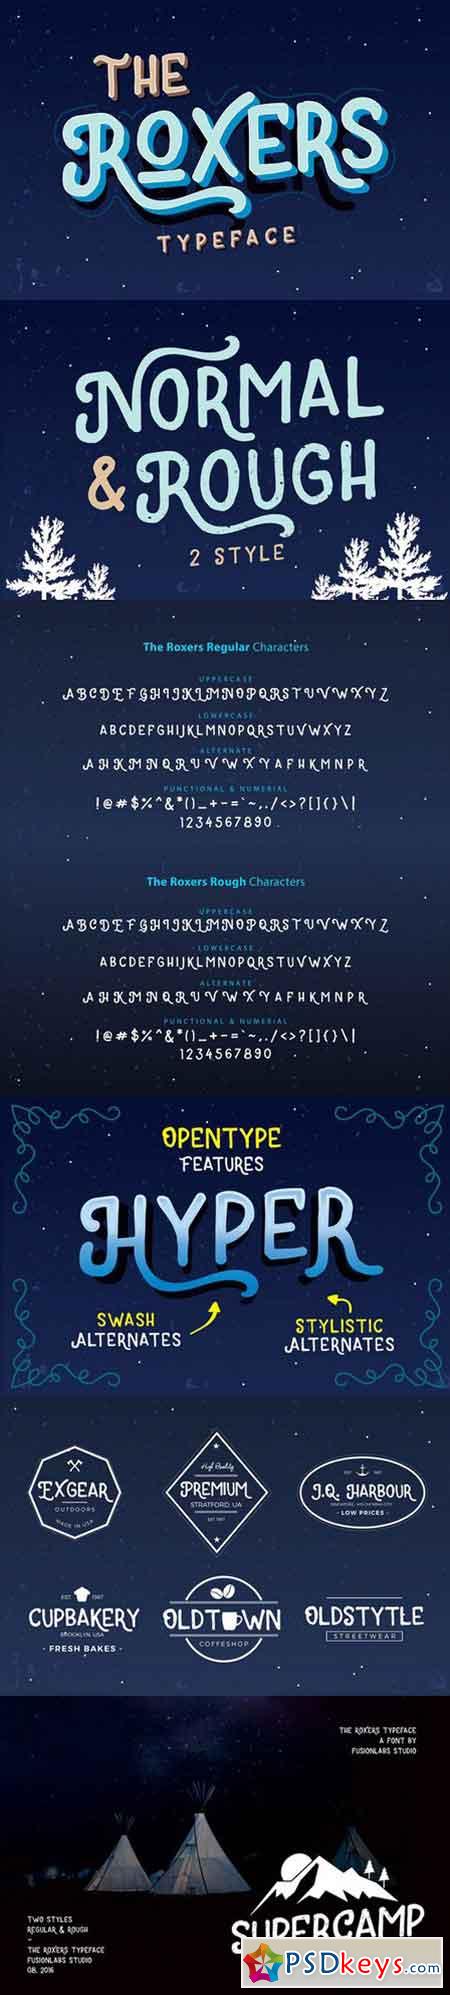 The Roxers Typeface 846538